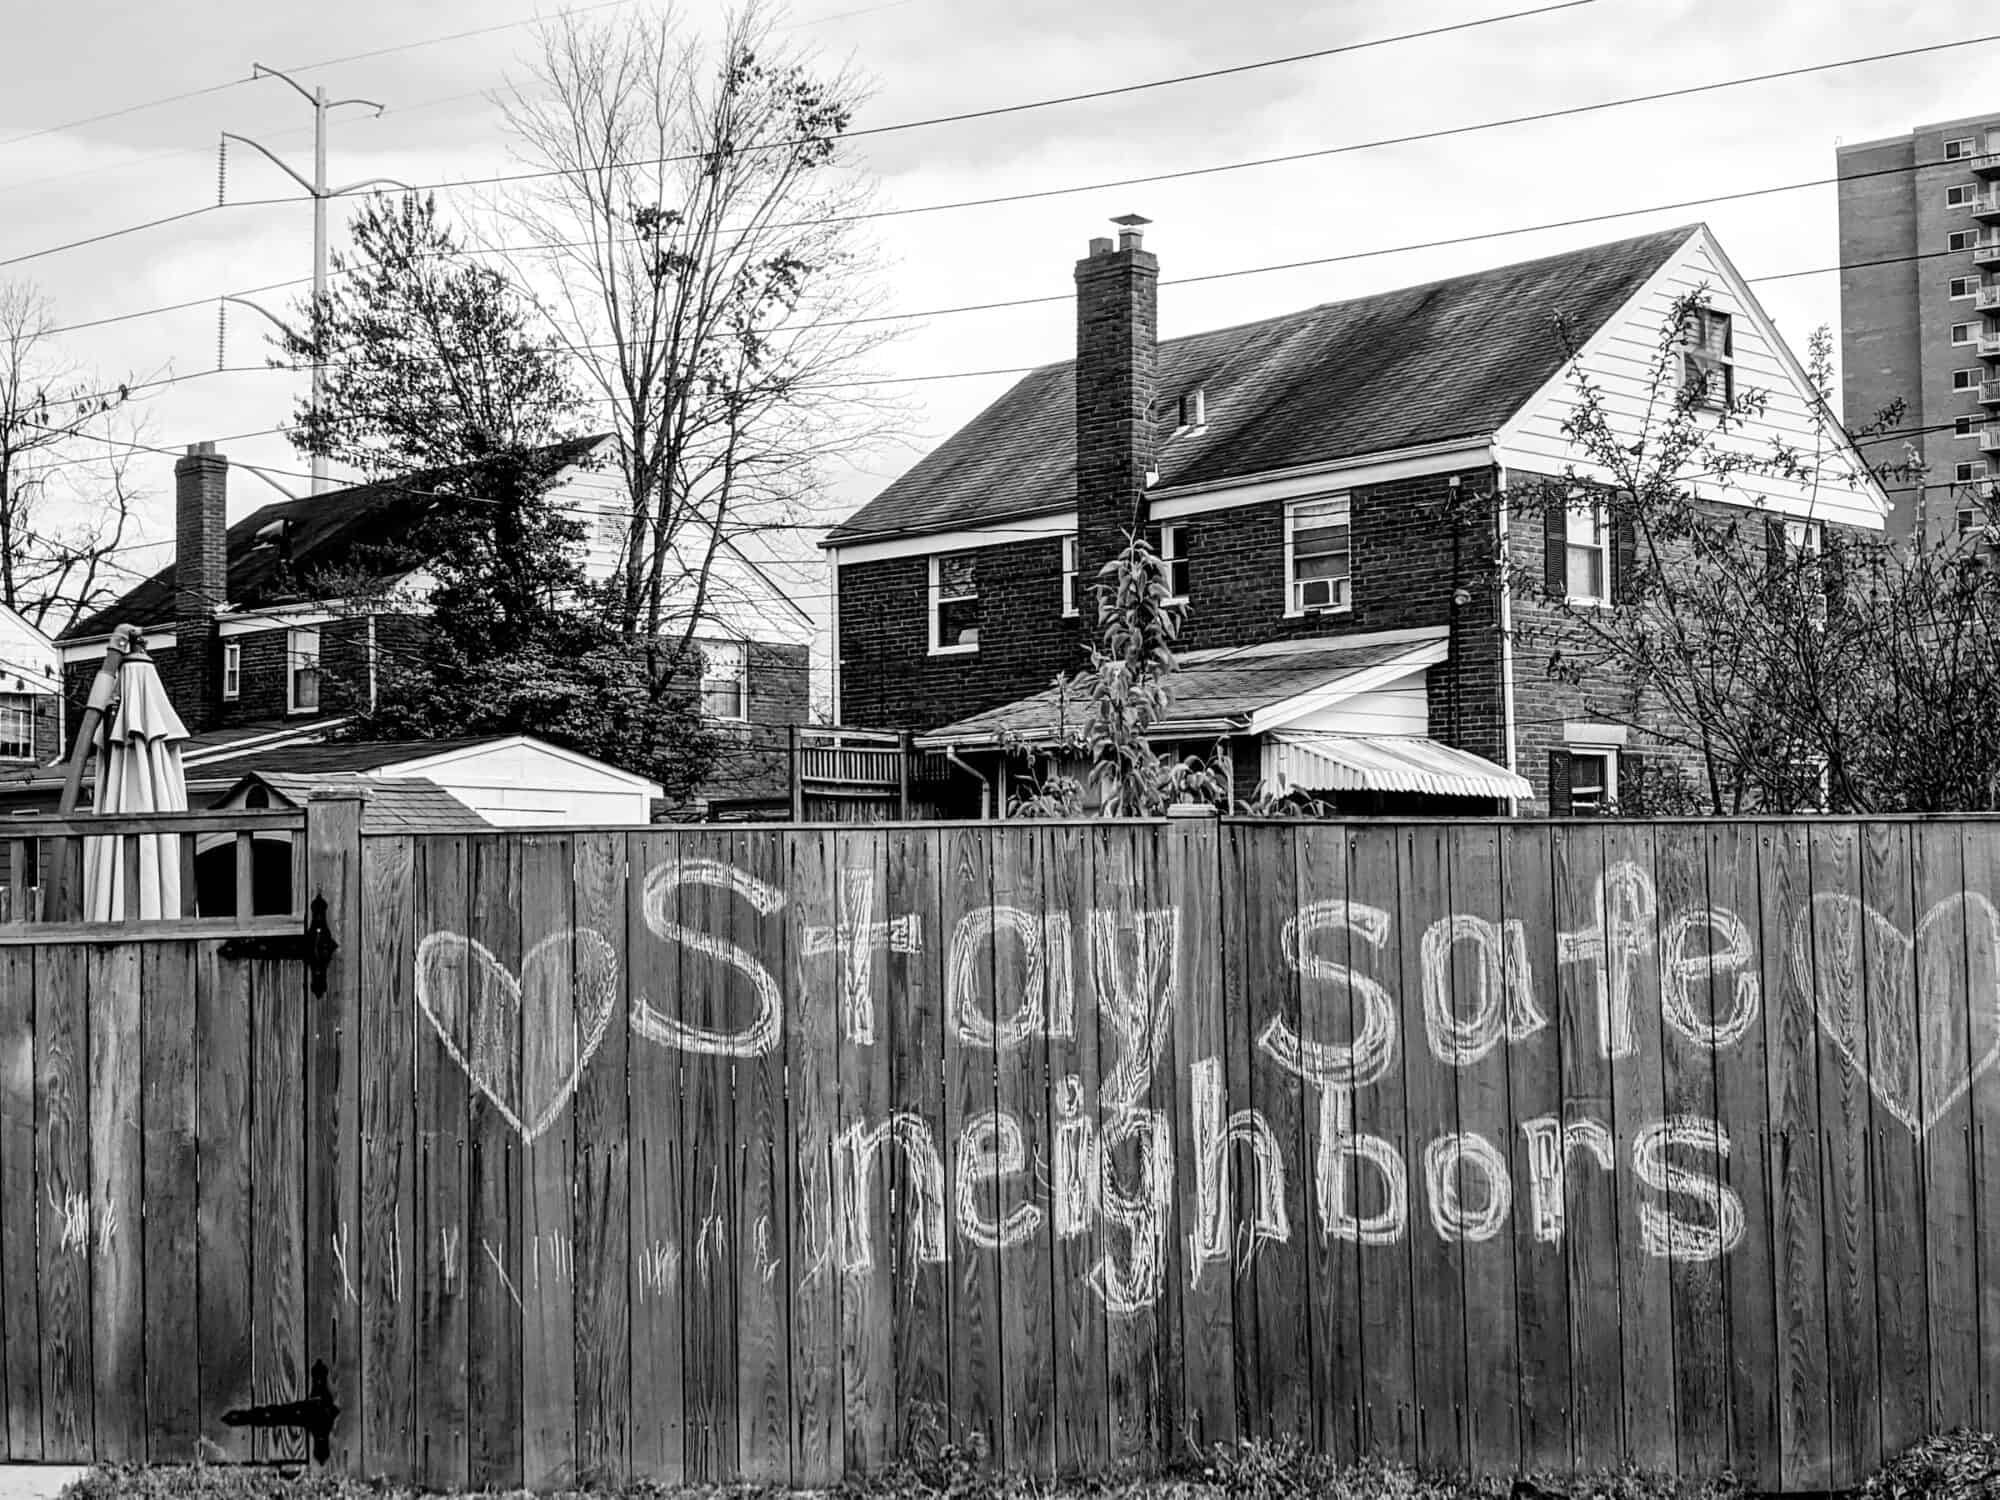 A photo of a neighbourhood fence with "Stay safe neighbours" drawn in chalk behind housing.